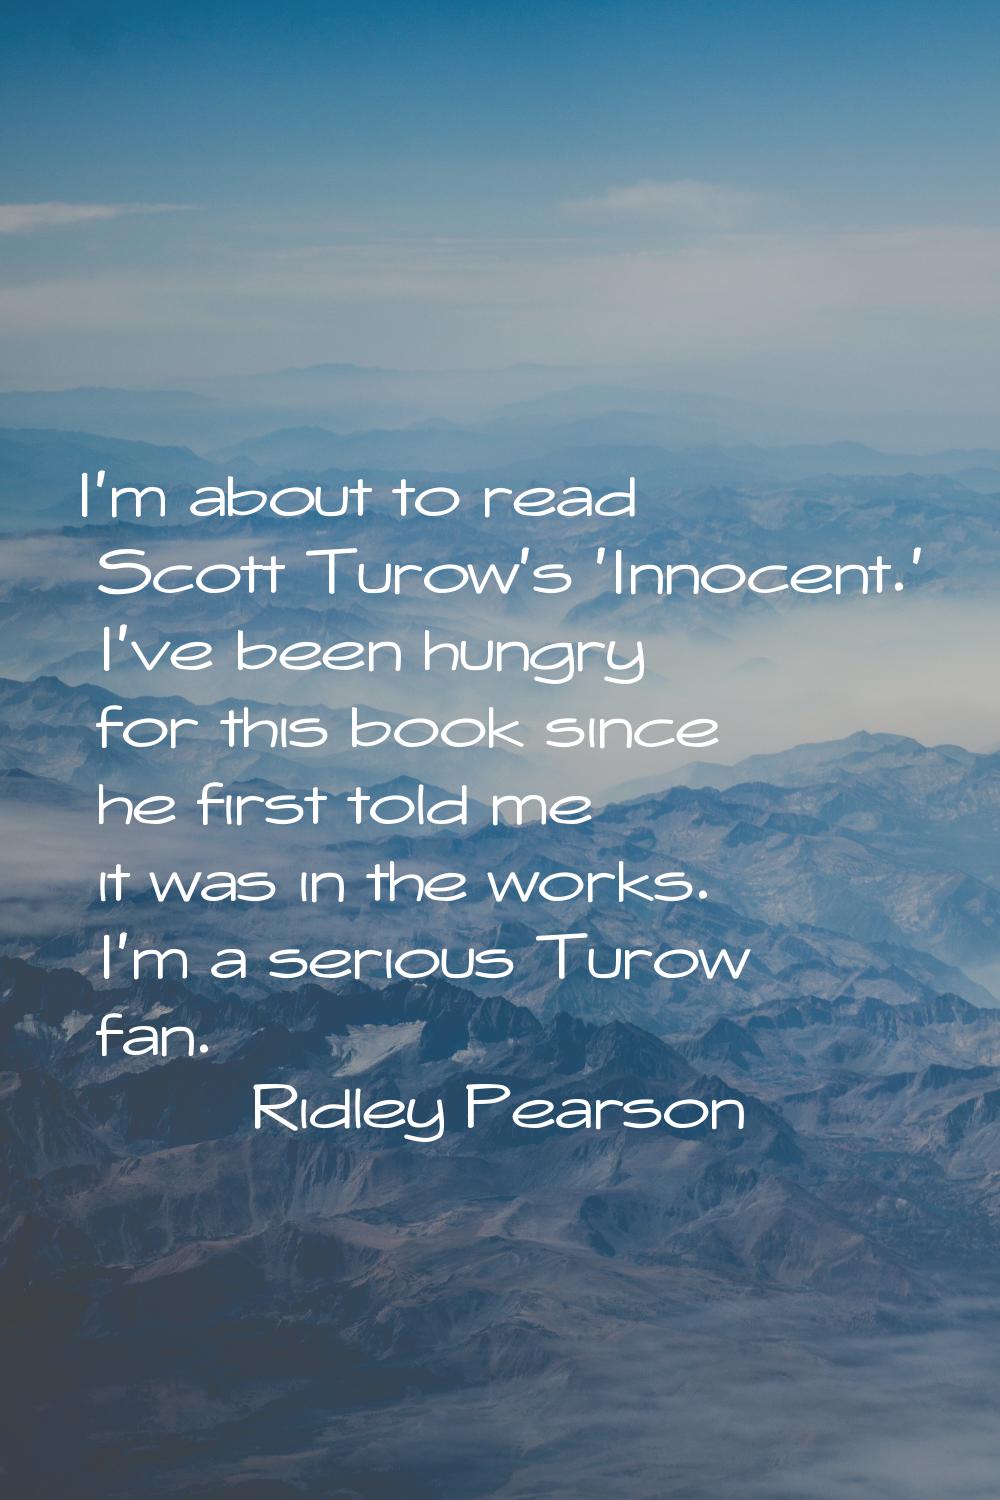 I'm about to read Scott Turow's 'Innocent.' I've been hungry for this book since he first told me i